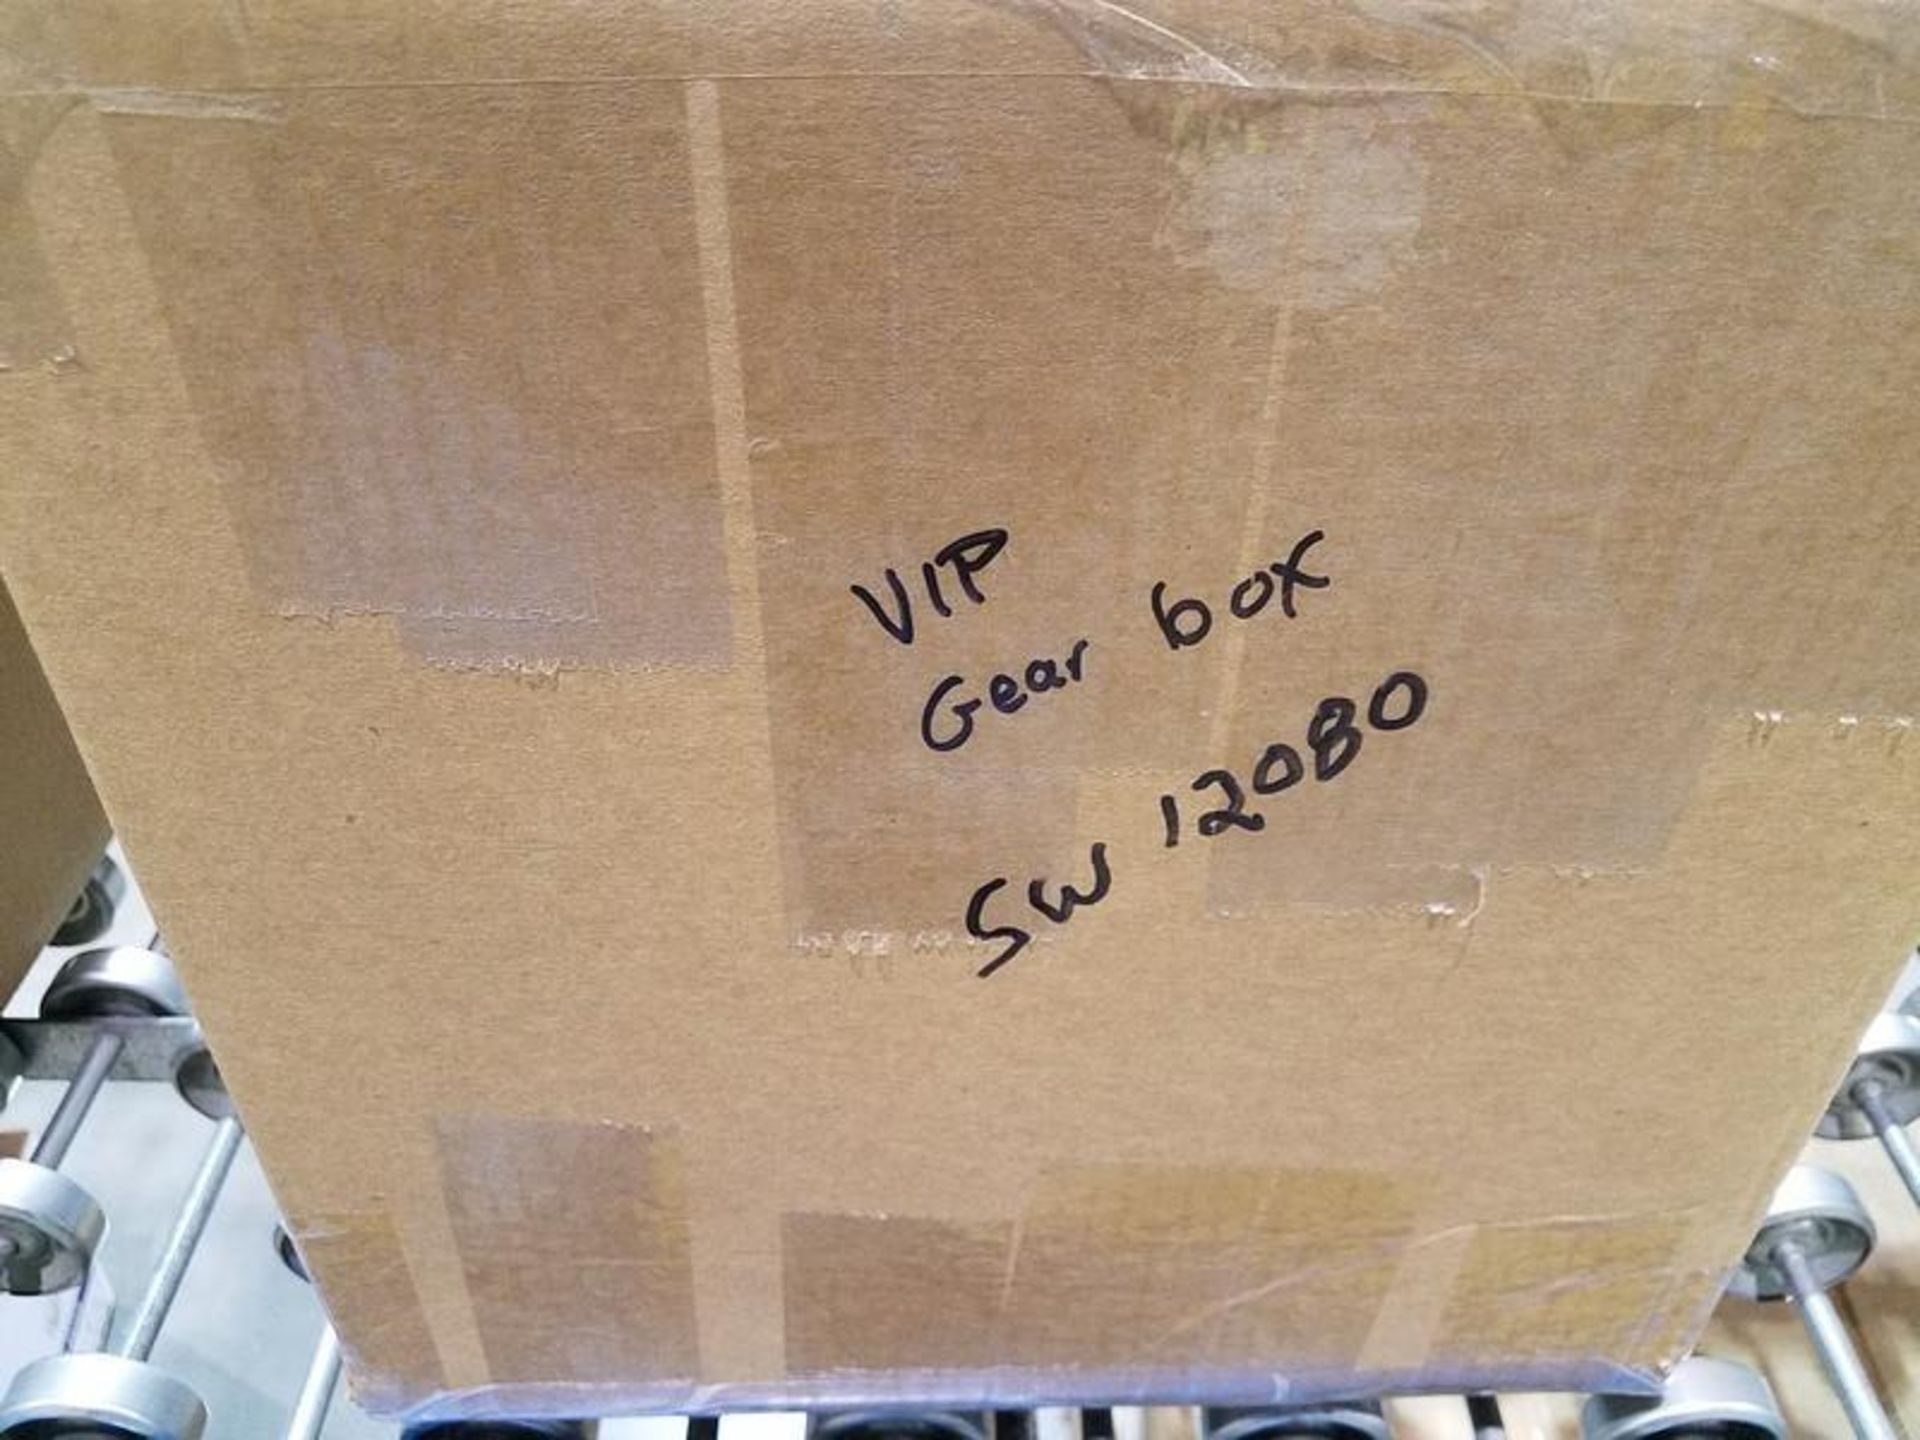 VIP Sheeter Spare Gear Box, SW 12080 - Image 3 of 3